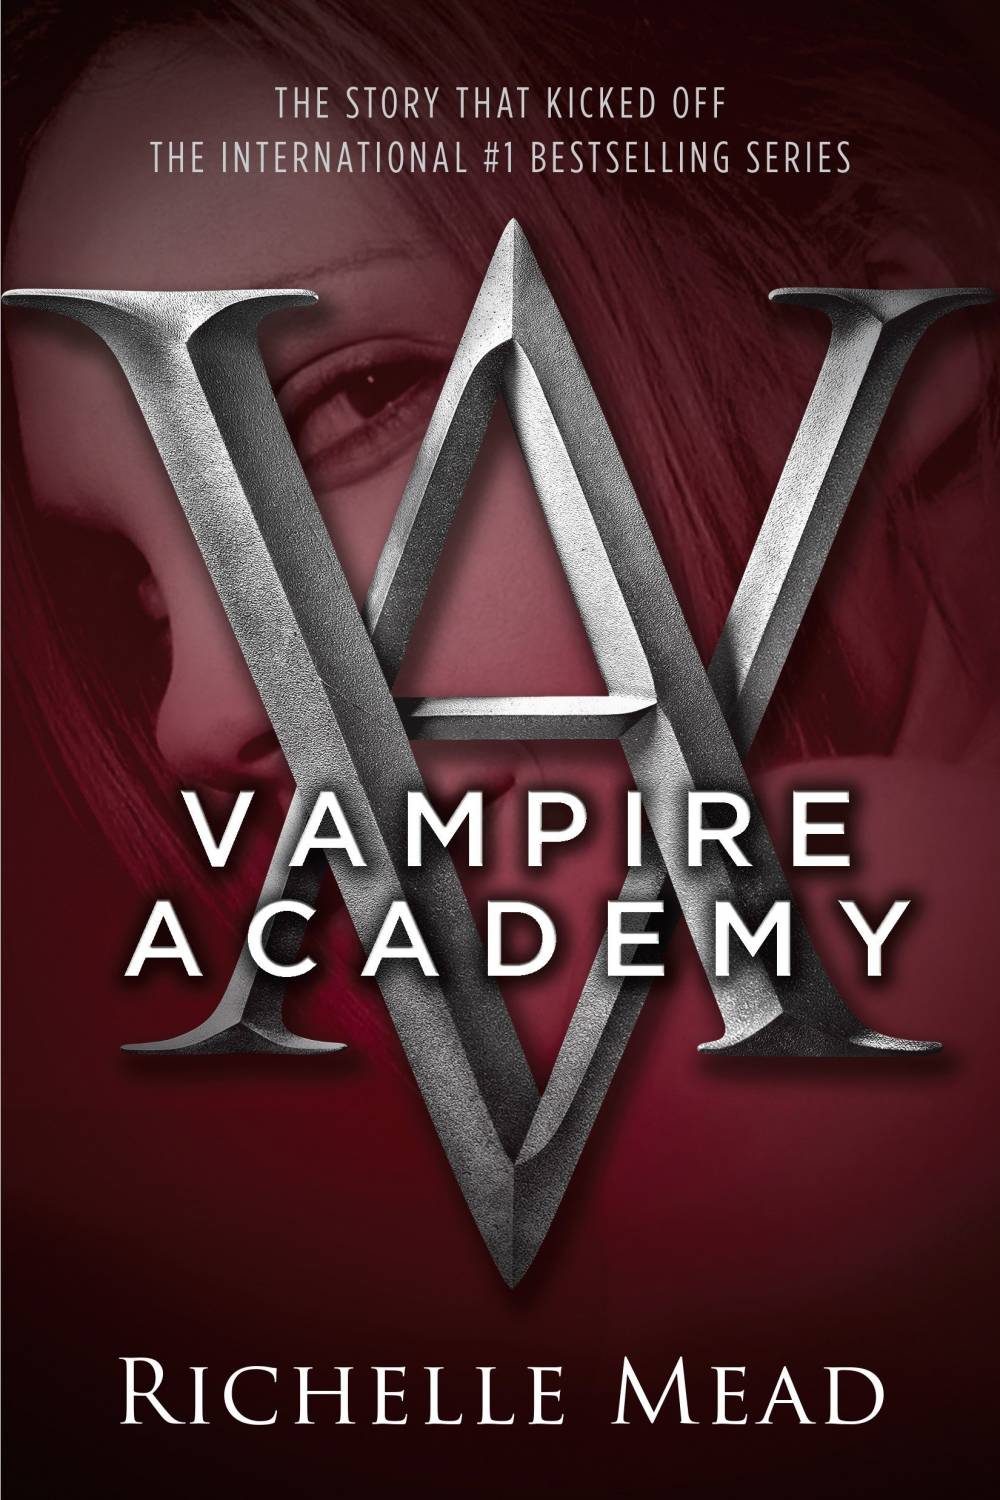 The Vampire Academy series by Richelle Mead